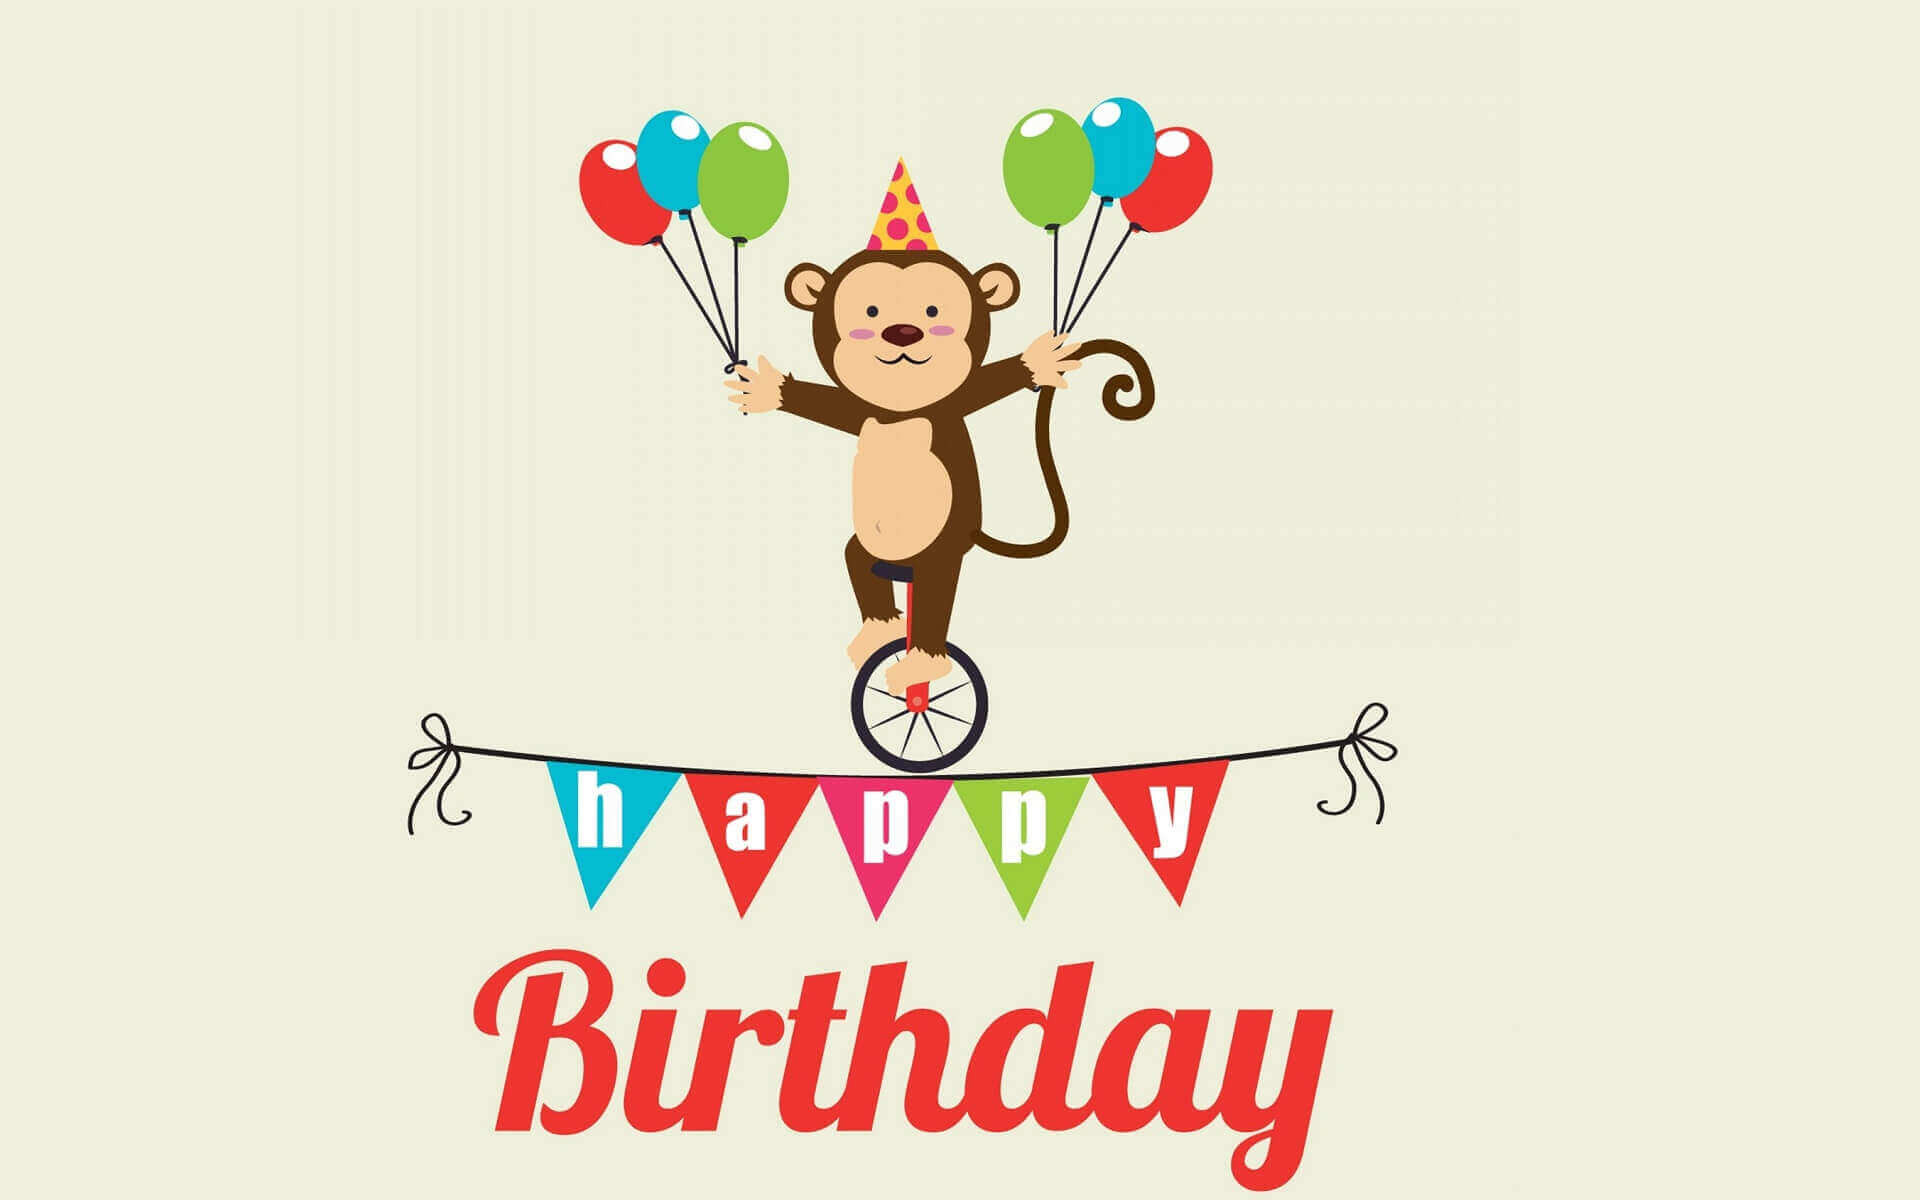 Funny Happy Birthday Pics And Quotes
 200 Funny Happy Birthday Wishes Quotes Ever FungiStaaan